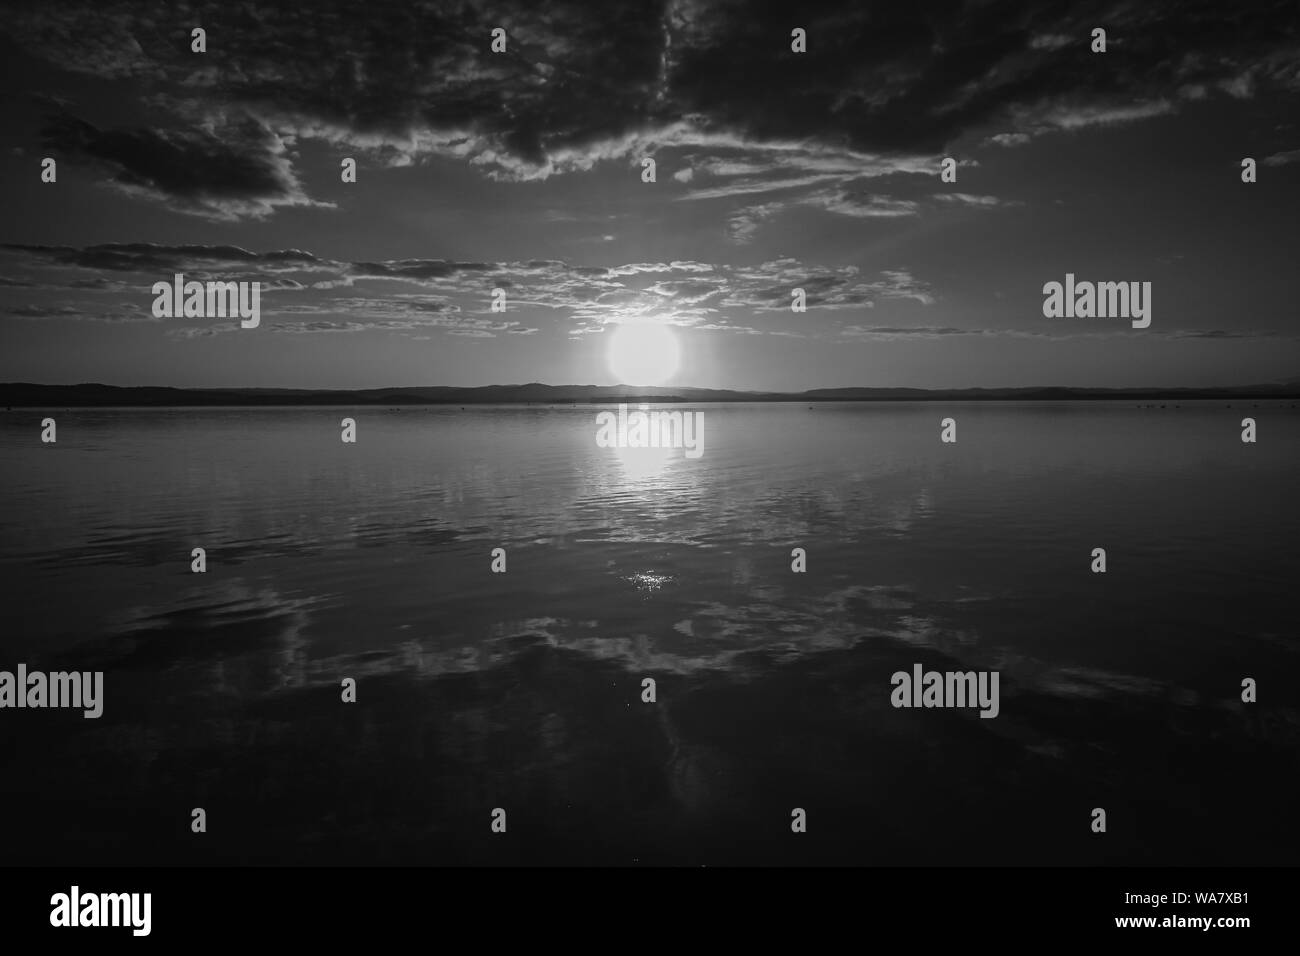 Beautiful scenic view of the red sunset over a lake shot in black and white Stock Photo